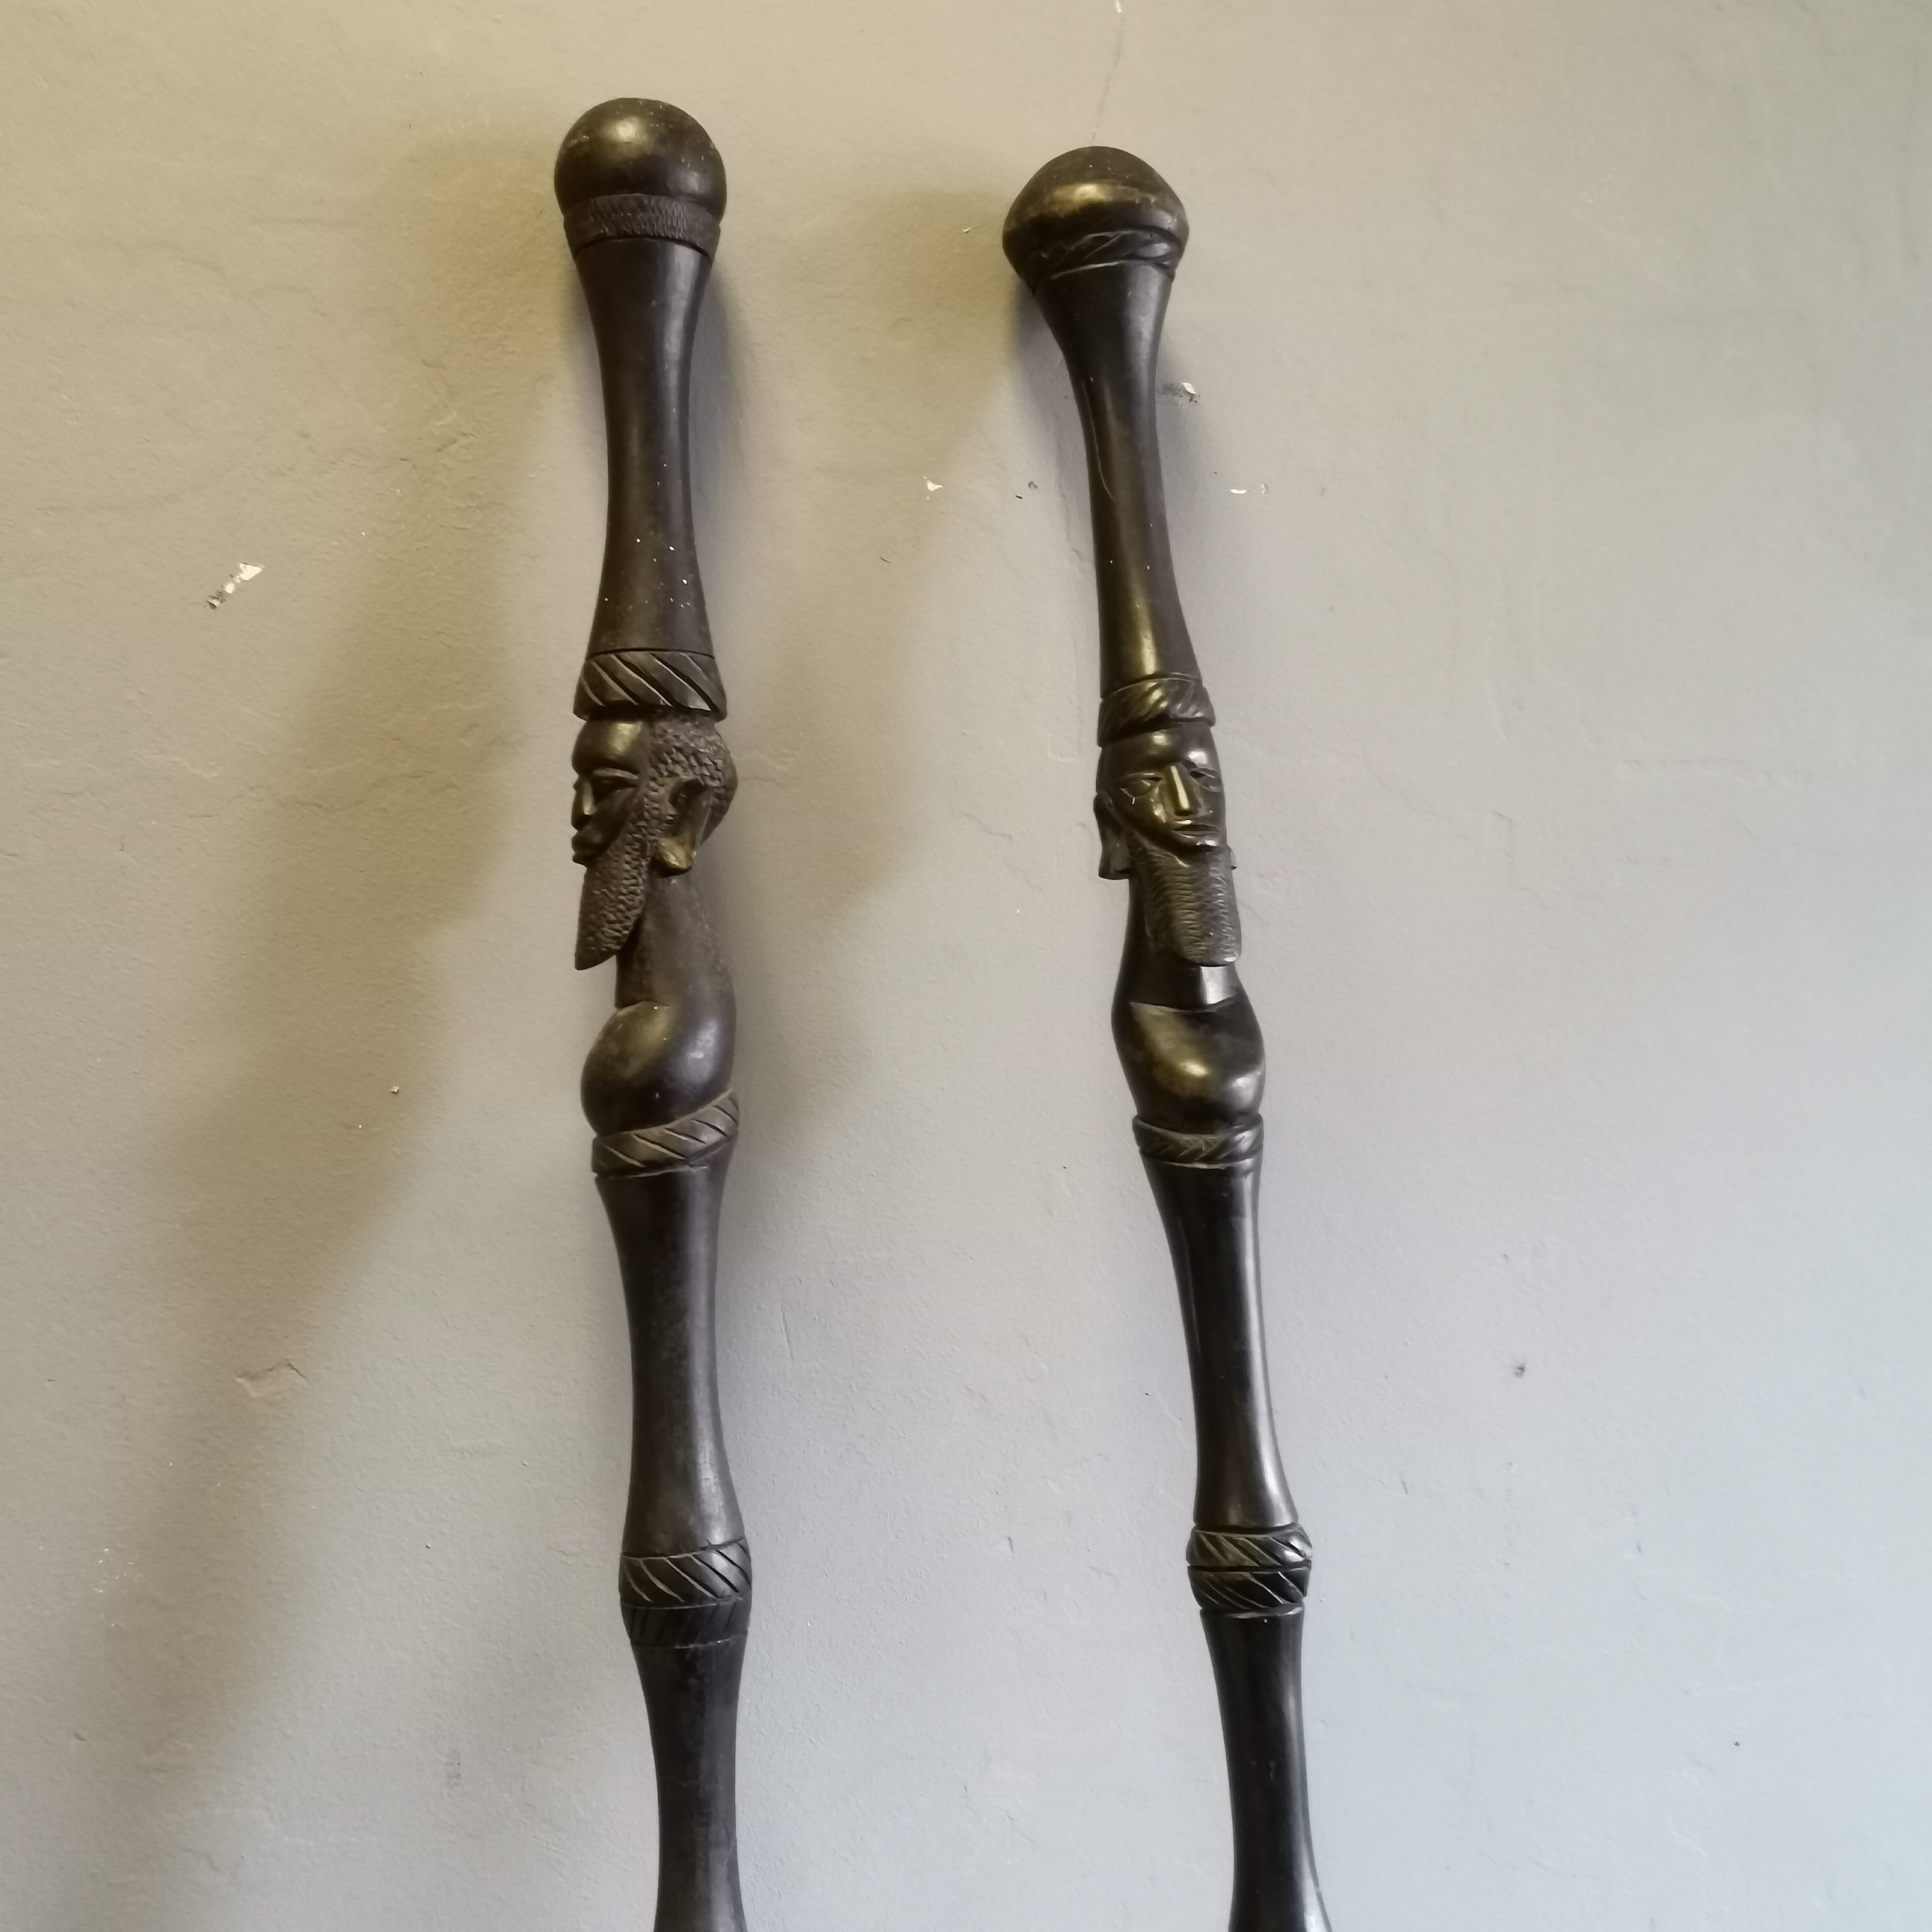 2 African Tribal hardwood carved walking sticks/staffs decorated with carved heads and decoration, - Image 2 of 3